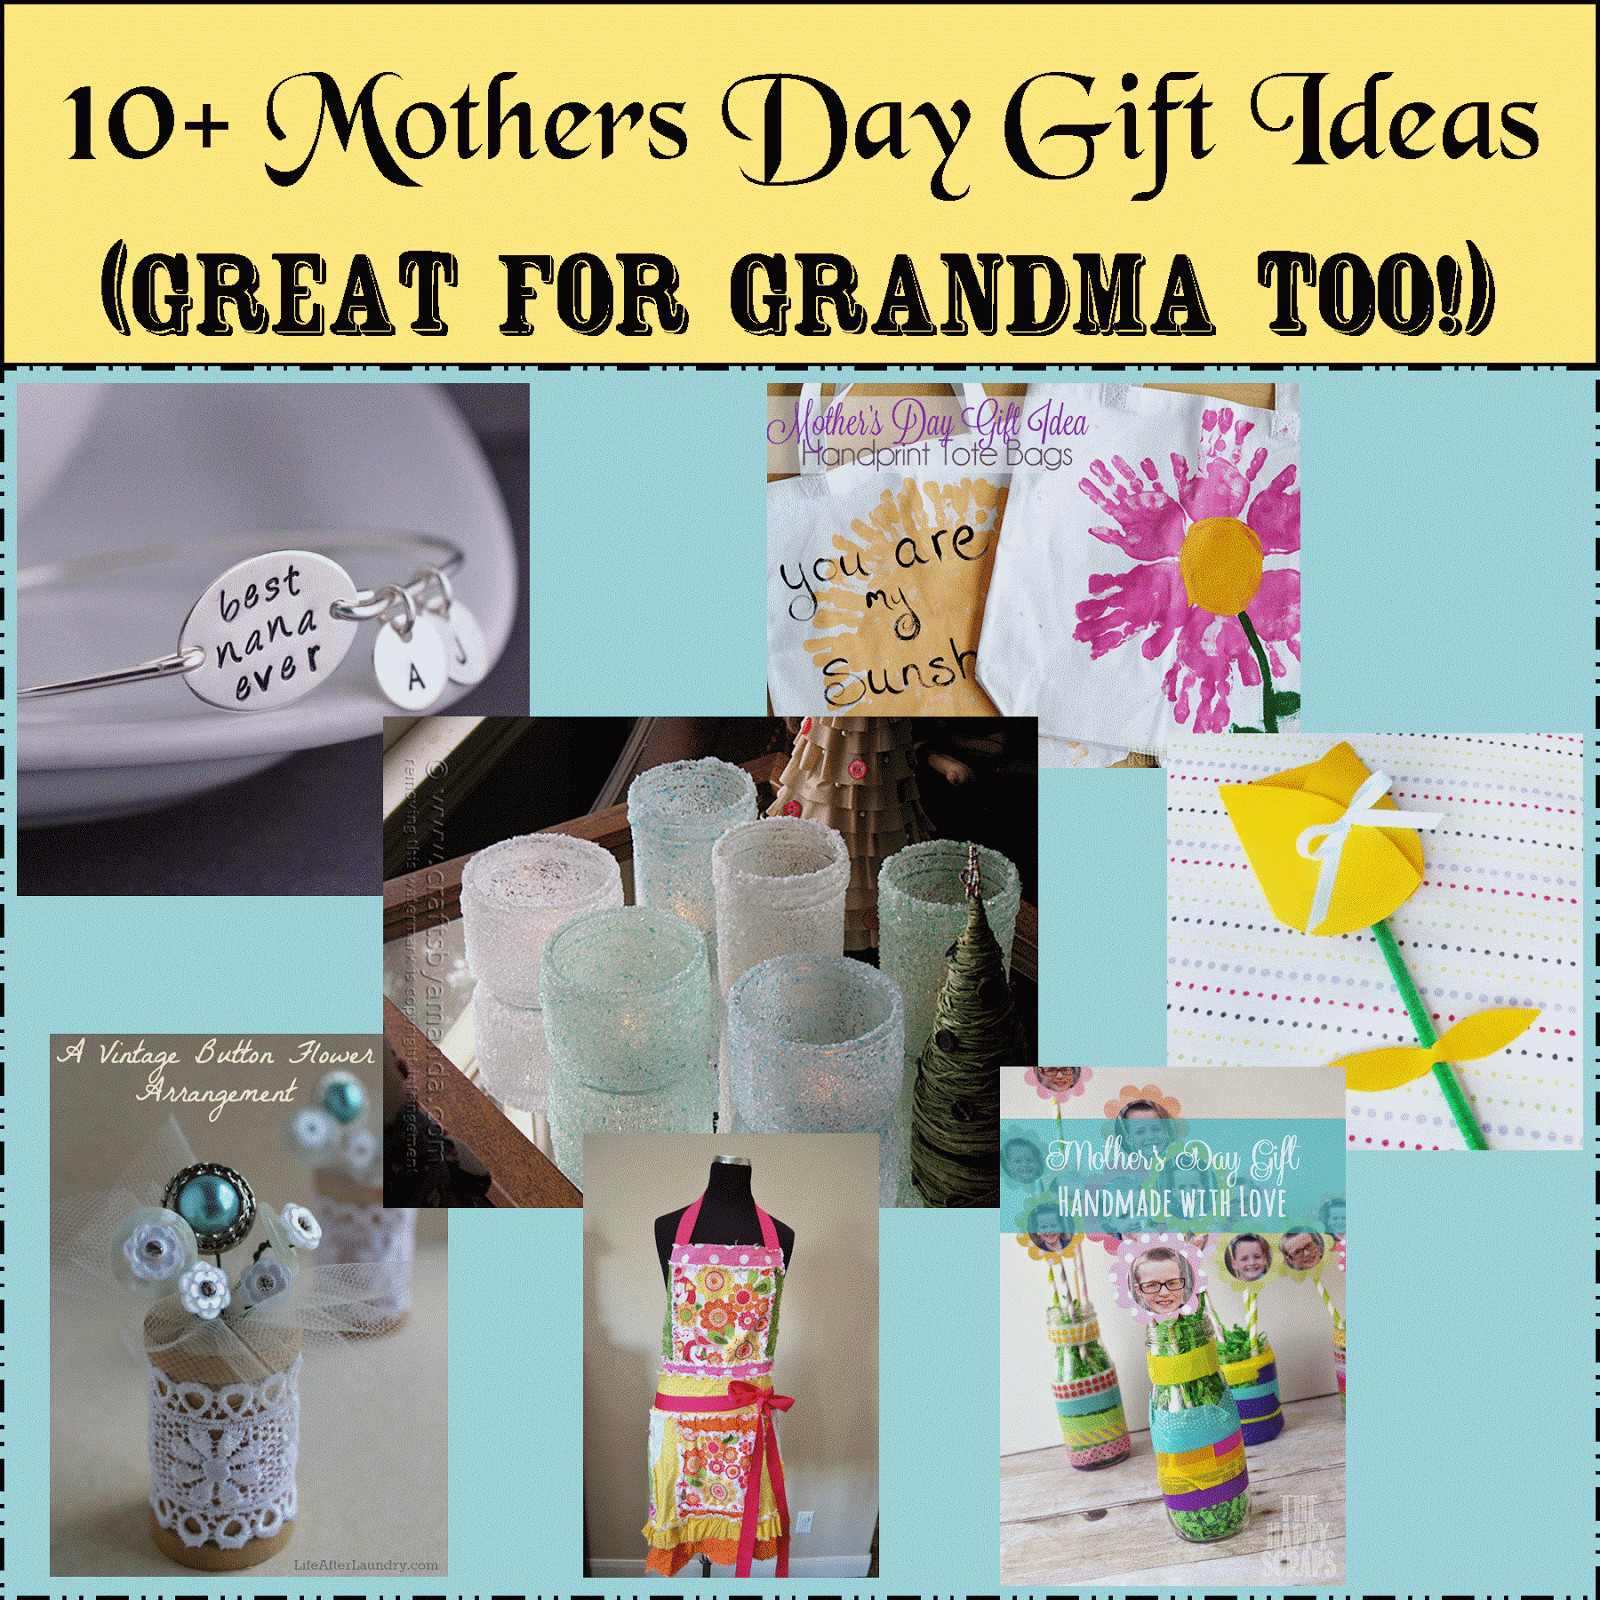 Grandma First Mother Day Gift Ideas
 Mother Day Gifts Roundup Perfect for Grandma Too